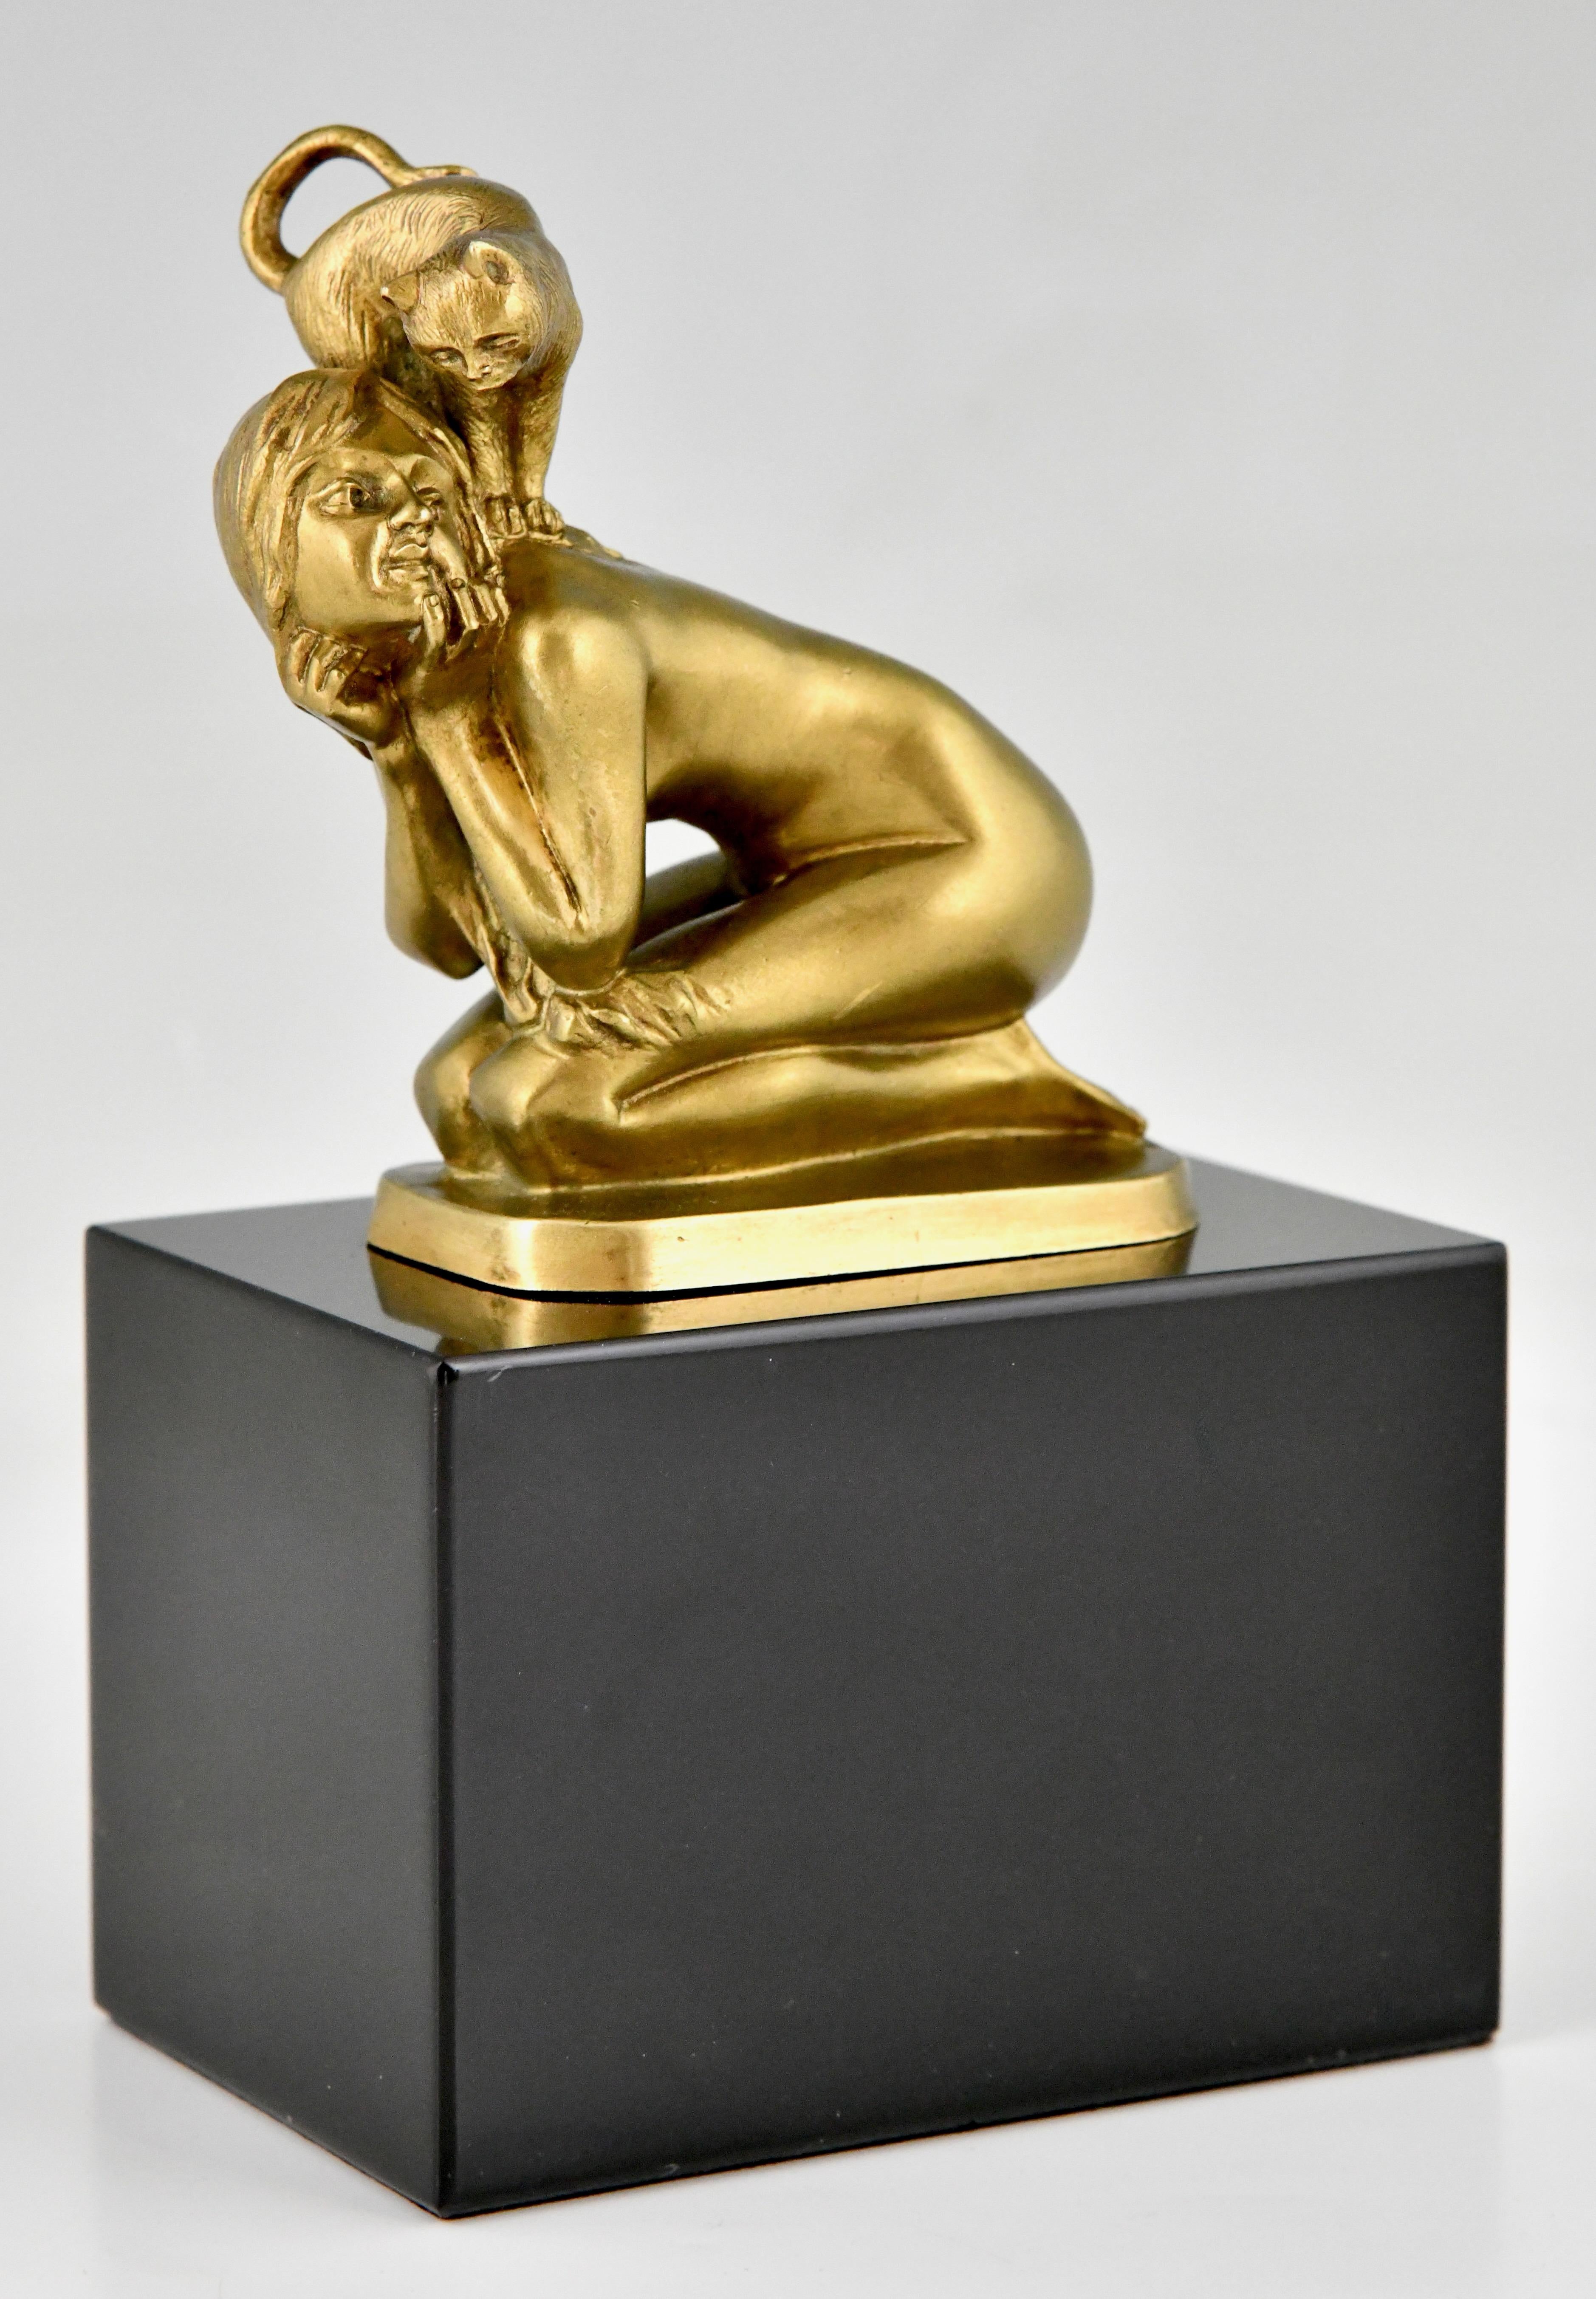 Art Deco bronze sculpture nude with cat by Henry Fugère.
Bronze sculpture, golden patina, on Black Marble base. 
France 1925. 